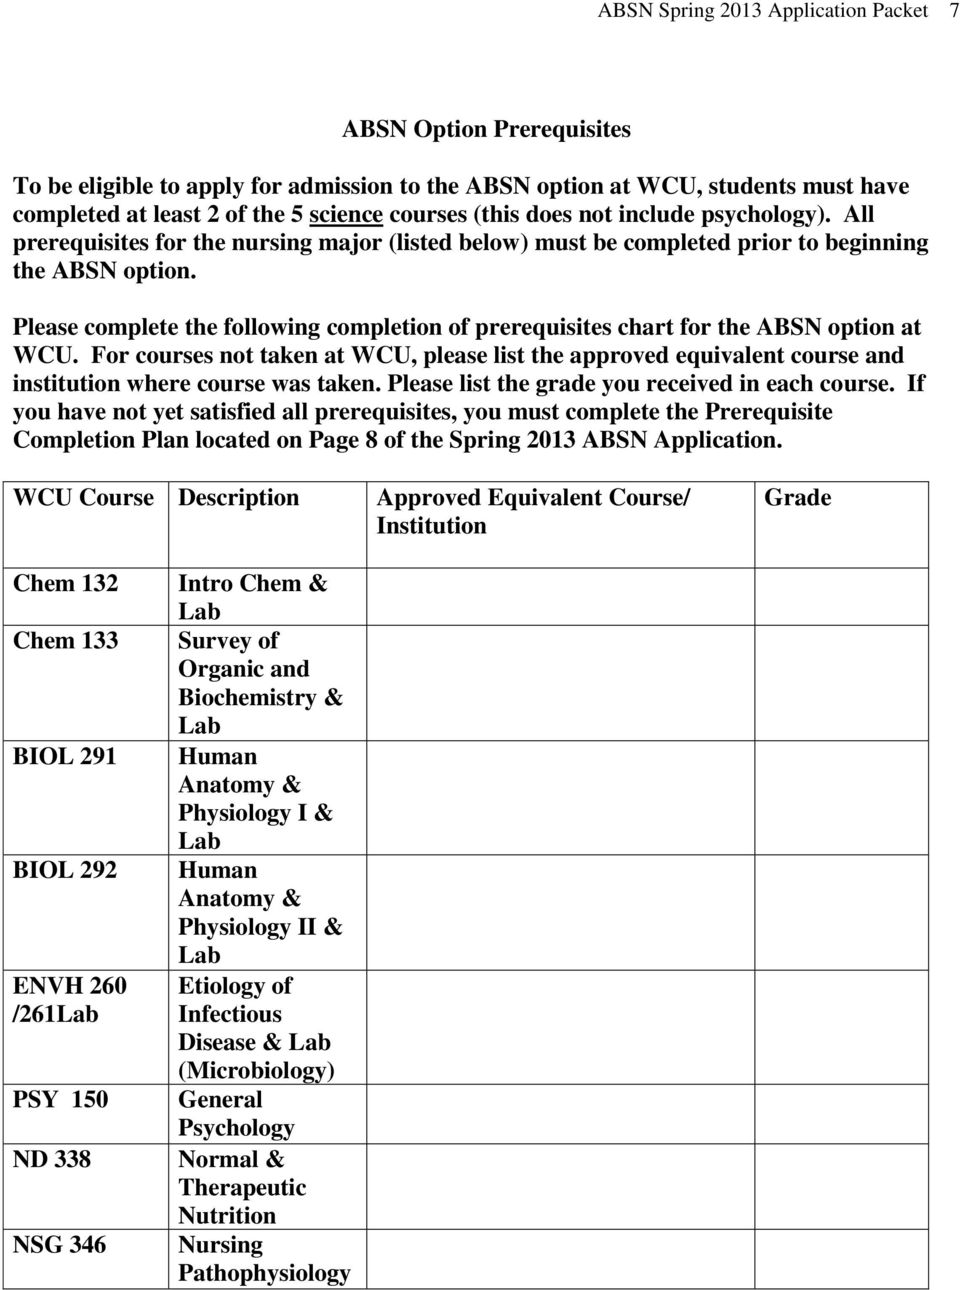 Please complete the following completion of prerequisites chart for the ABSN option at WCU.